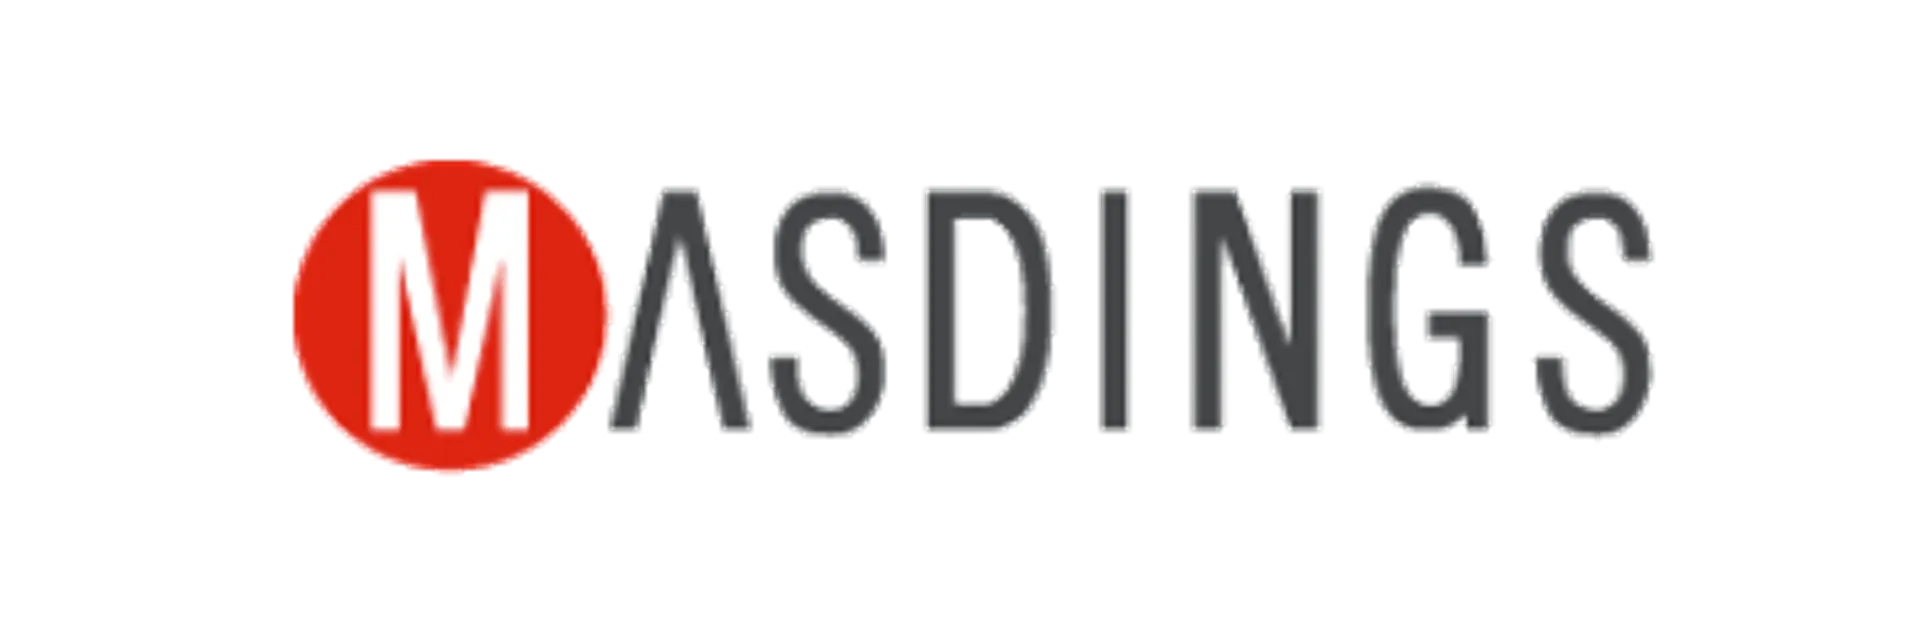 MASDINGS logo. Current weekly ad